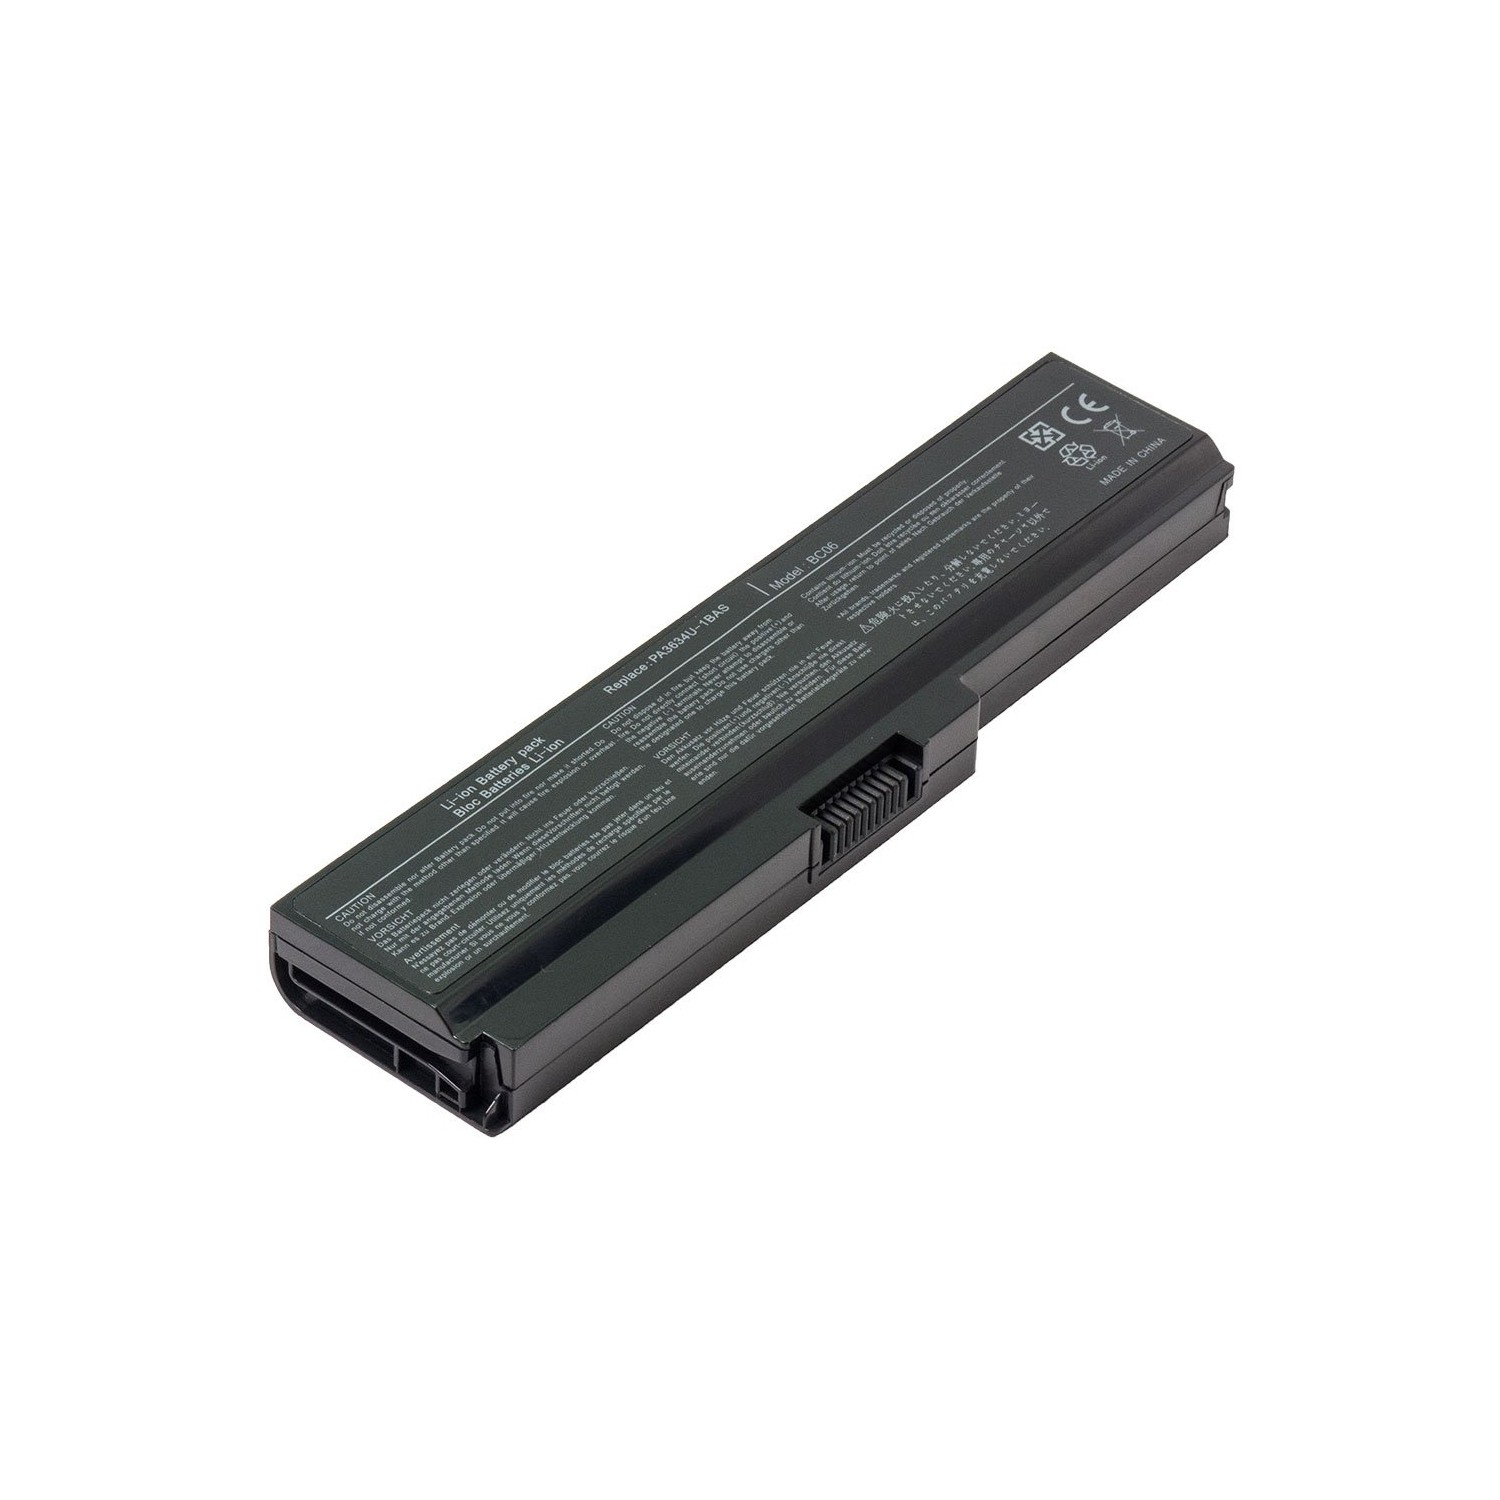 Laptop Battery Replacement for Toshiba Satellite C650D Series, PA3635U-1BRM, PABAS116, PABAS227, PABAS230